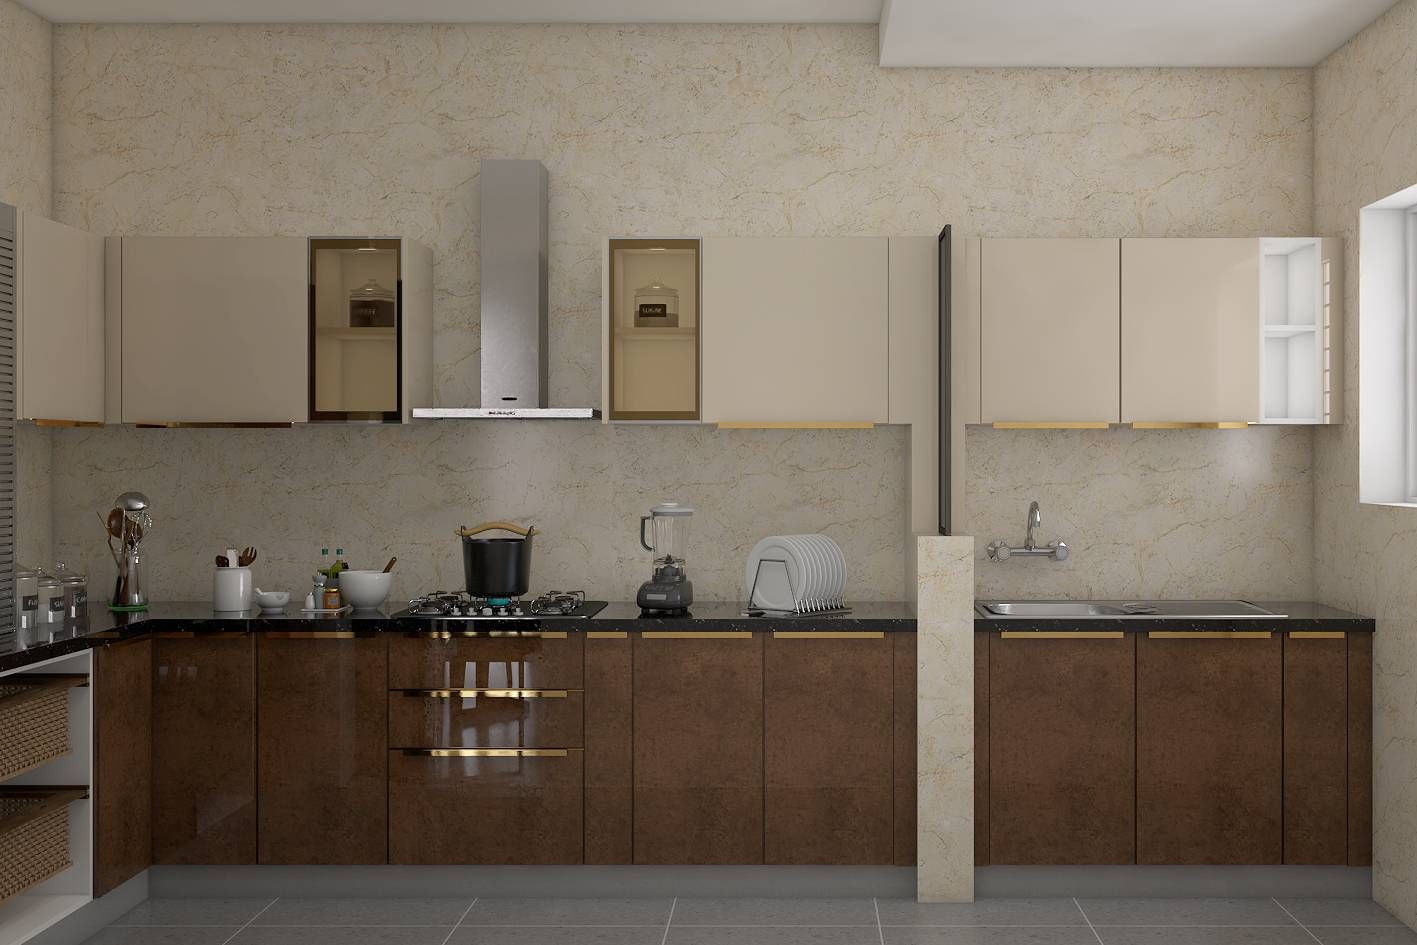 Modern Modular L-Shaped Kitchen Design With An Earthy Palette